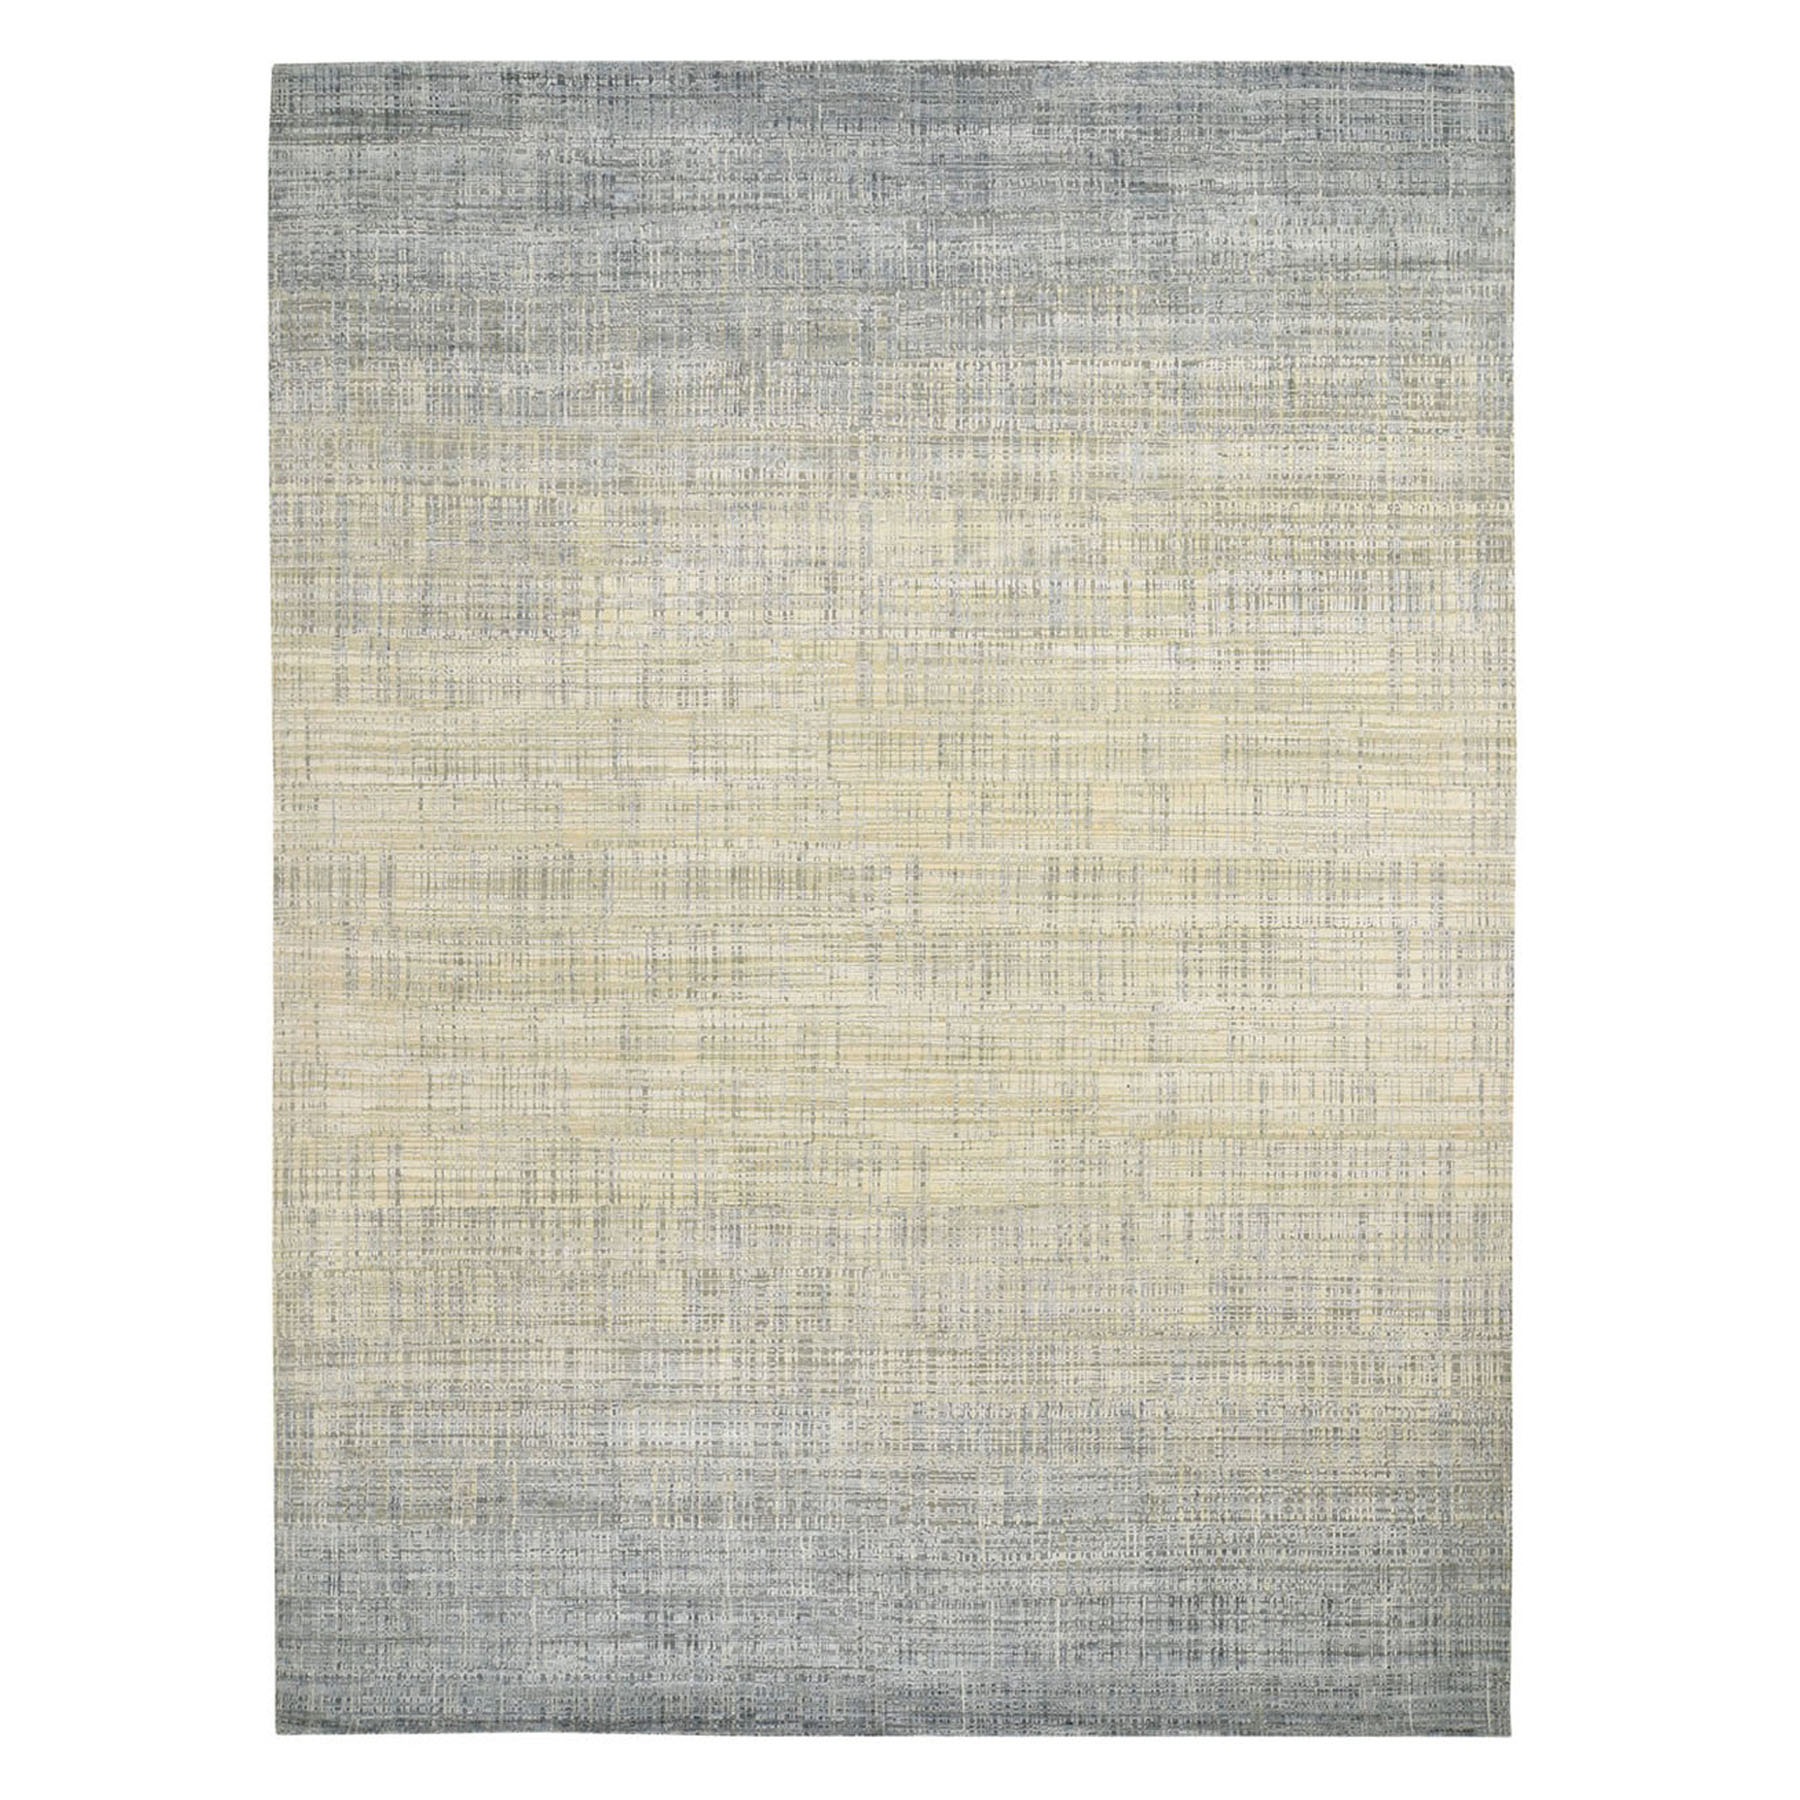 8'10"x12' Silk With Textured Wool Ombre Design Hand Woven Oriental Rug 